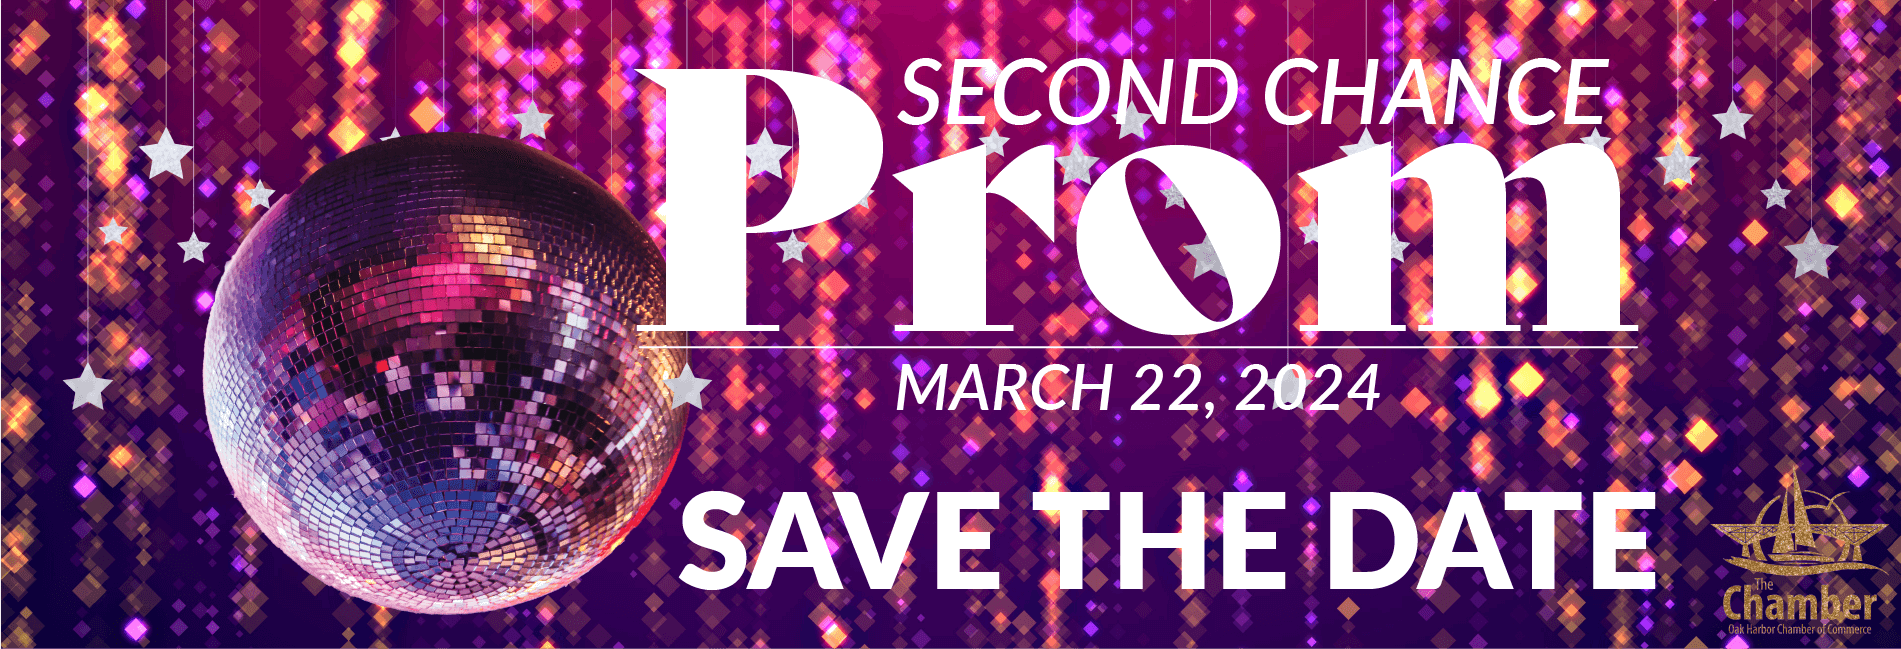 Save the date for second chance prom March 22, 2024